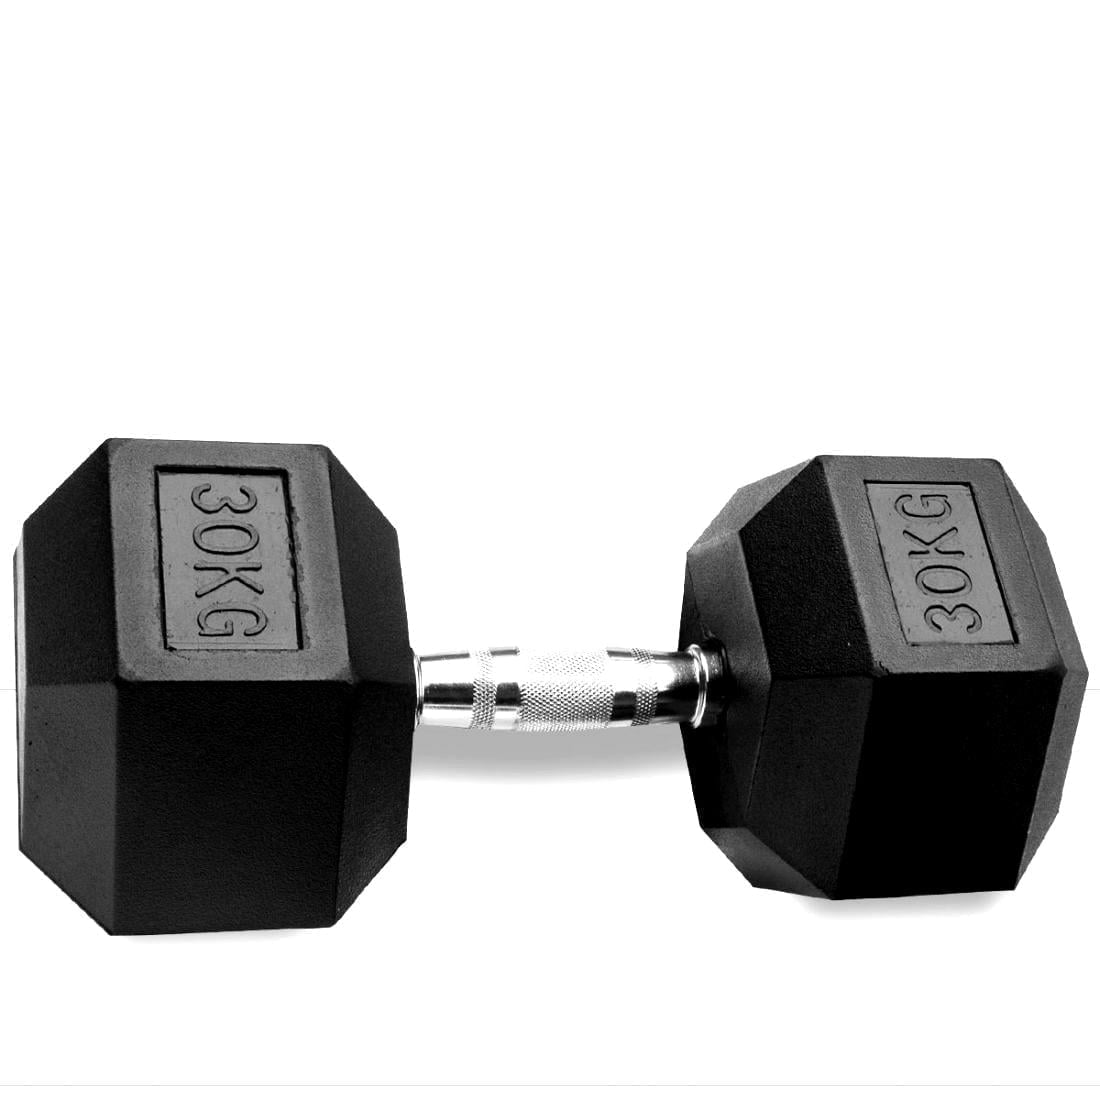 Rubber Hex Dumbbell That Doesnt Roll Or Damage Your Floor 30 Kg E1567702490862 Blackwhite Hex Dumbbells Are A Relatively Cheap Workout Enhancer, Increasing The Intensity Of Squat And Lunge Exercises As Well As A Variety Of Strength Training Exercises. The Hexagon Shape Stops Them From Rolling, And The Rubber Coating Prevents Damaging The Floor, Making Them Safe And Popular For Home Use. Hex Dumbbells Are Available In A Wide Range Of Weight Categories To Coordinate With Your Workout Regimen. Dumbbell 30 Kg Hex Rubber Dumbbell 30 Kg